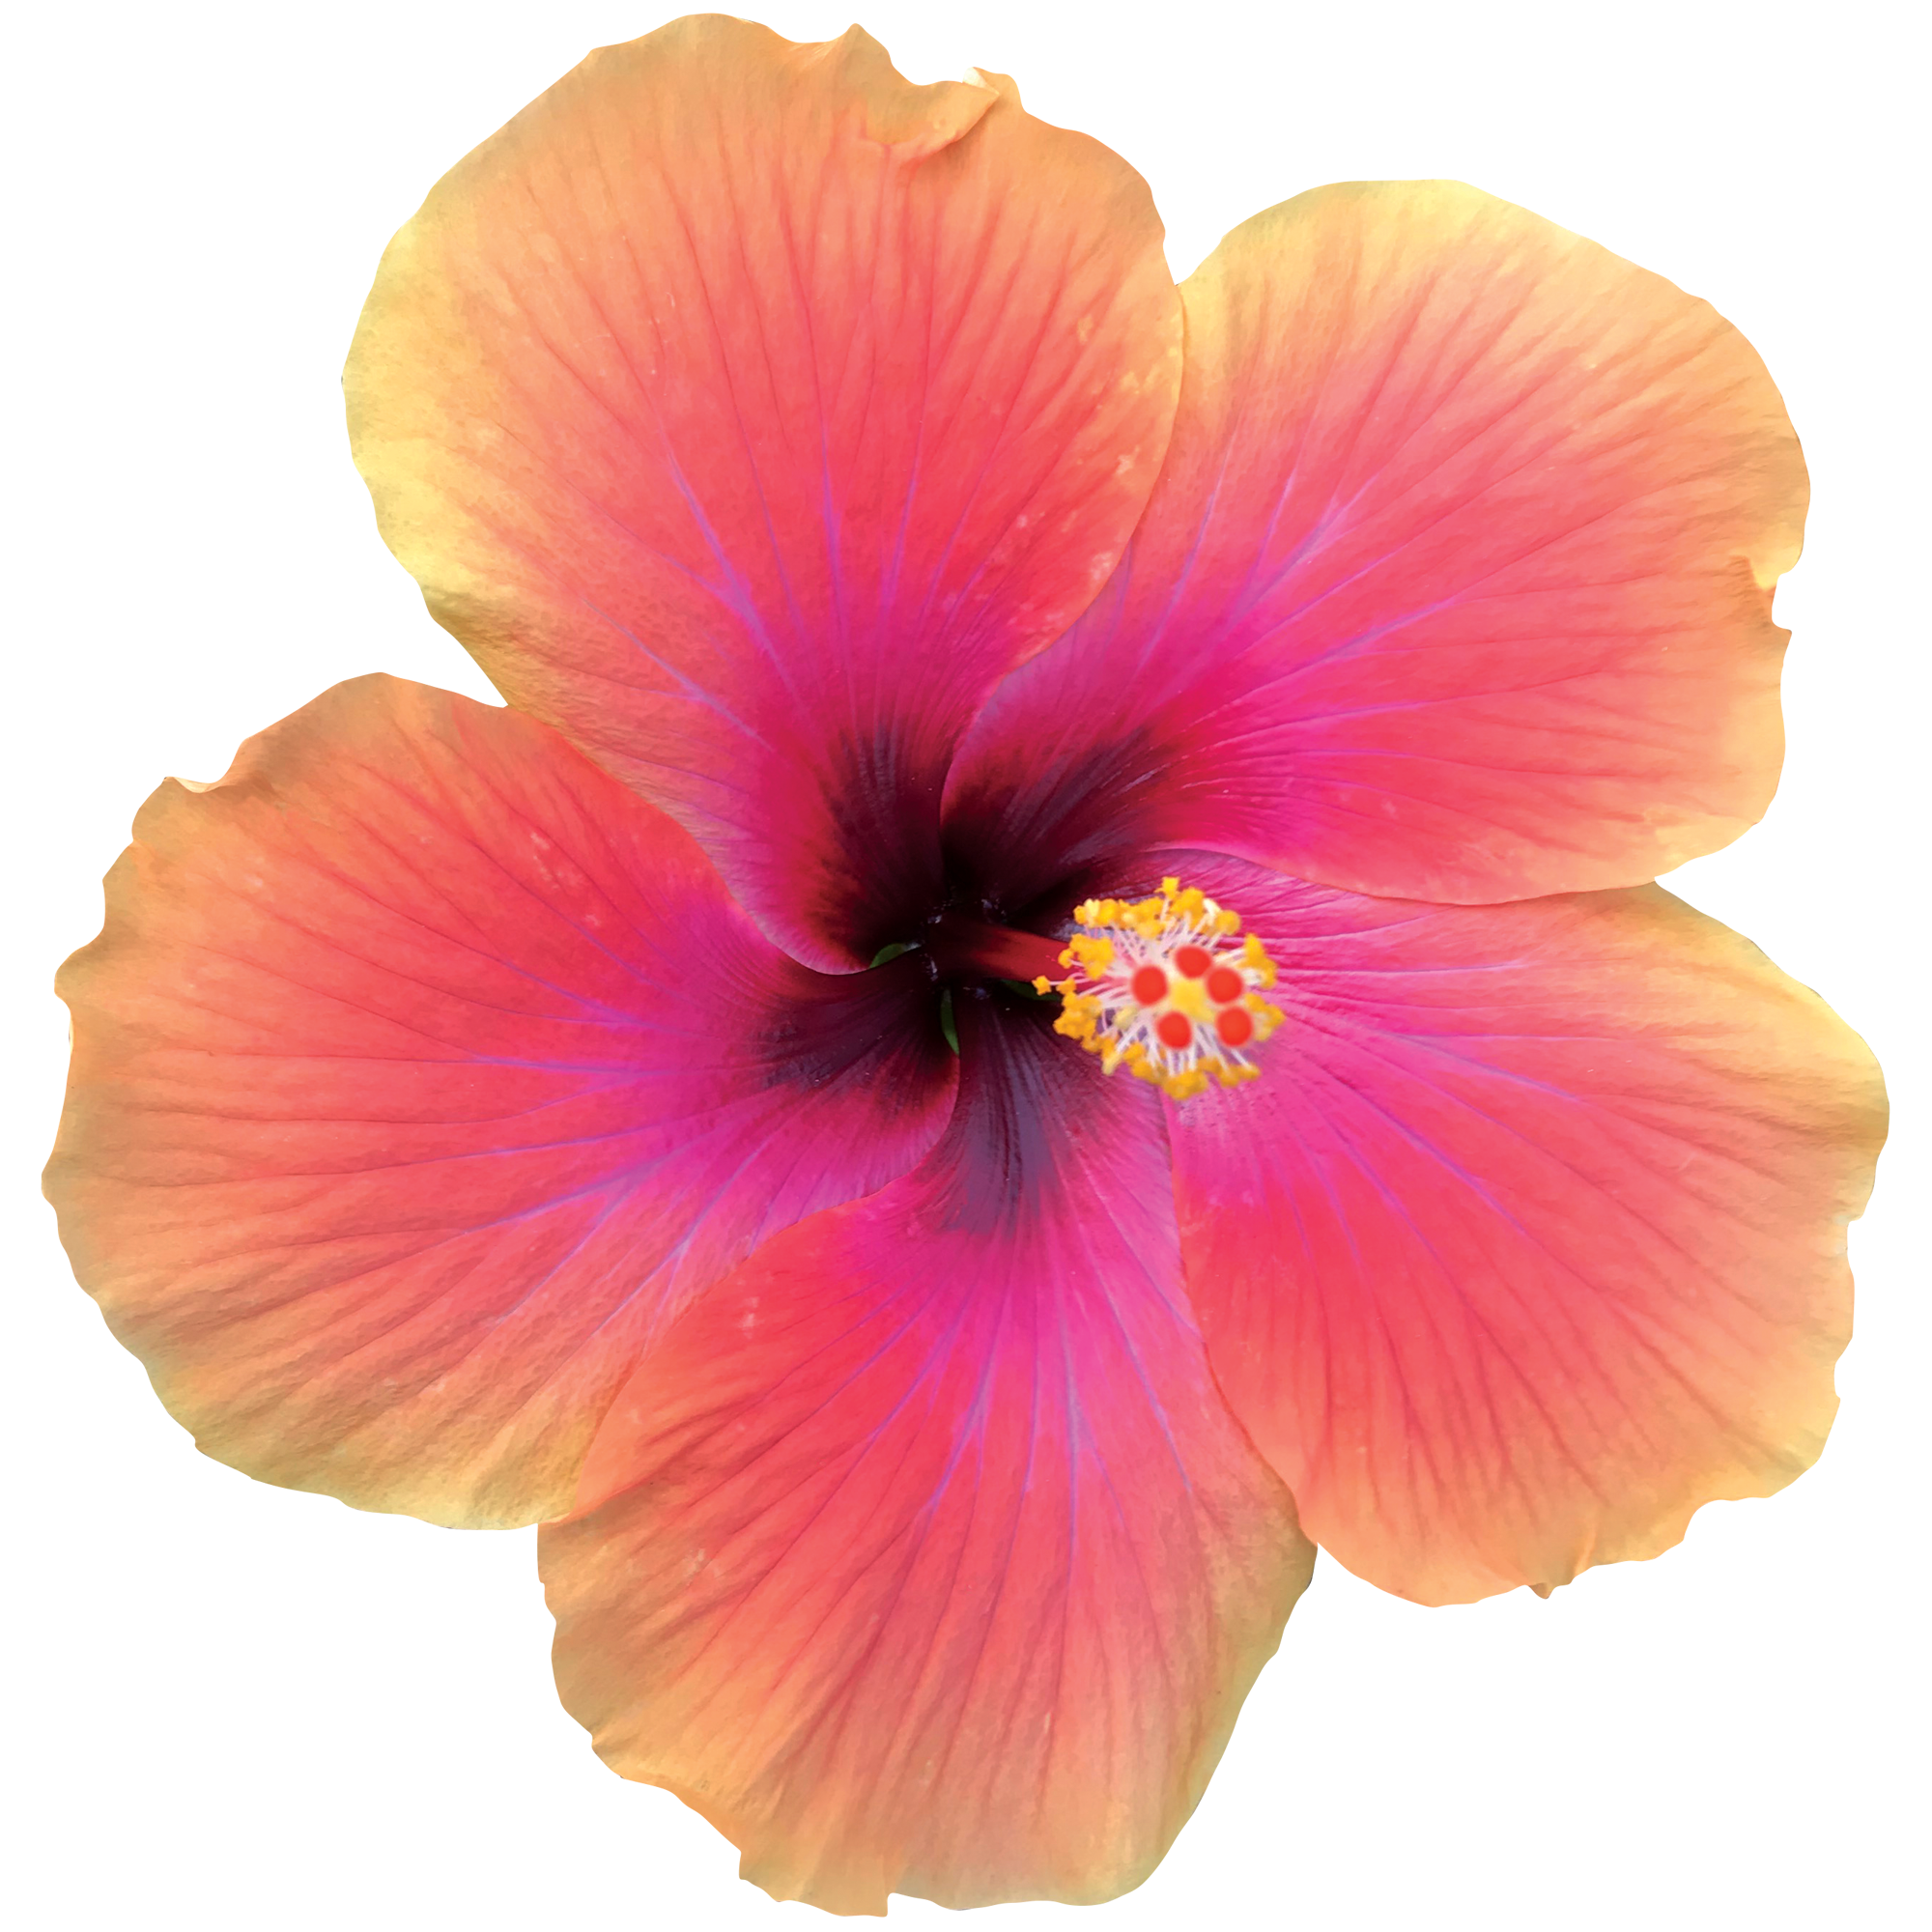 Hibiscus Flower Background PNG